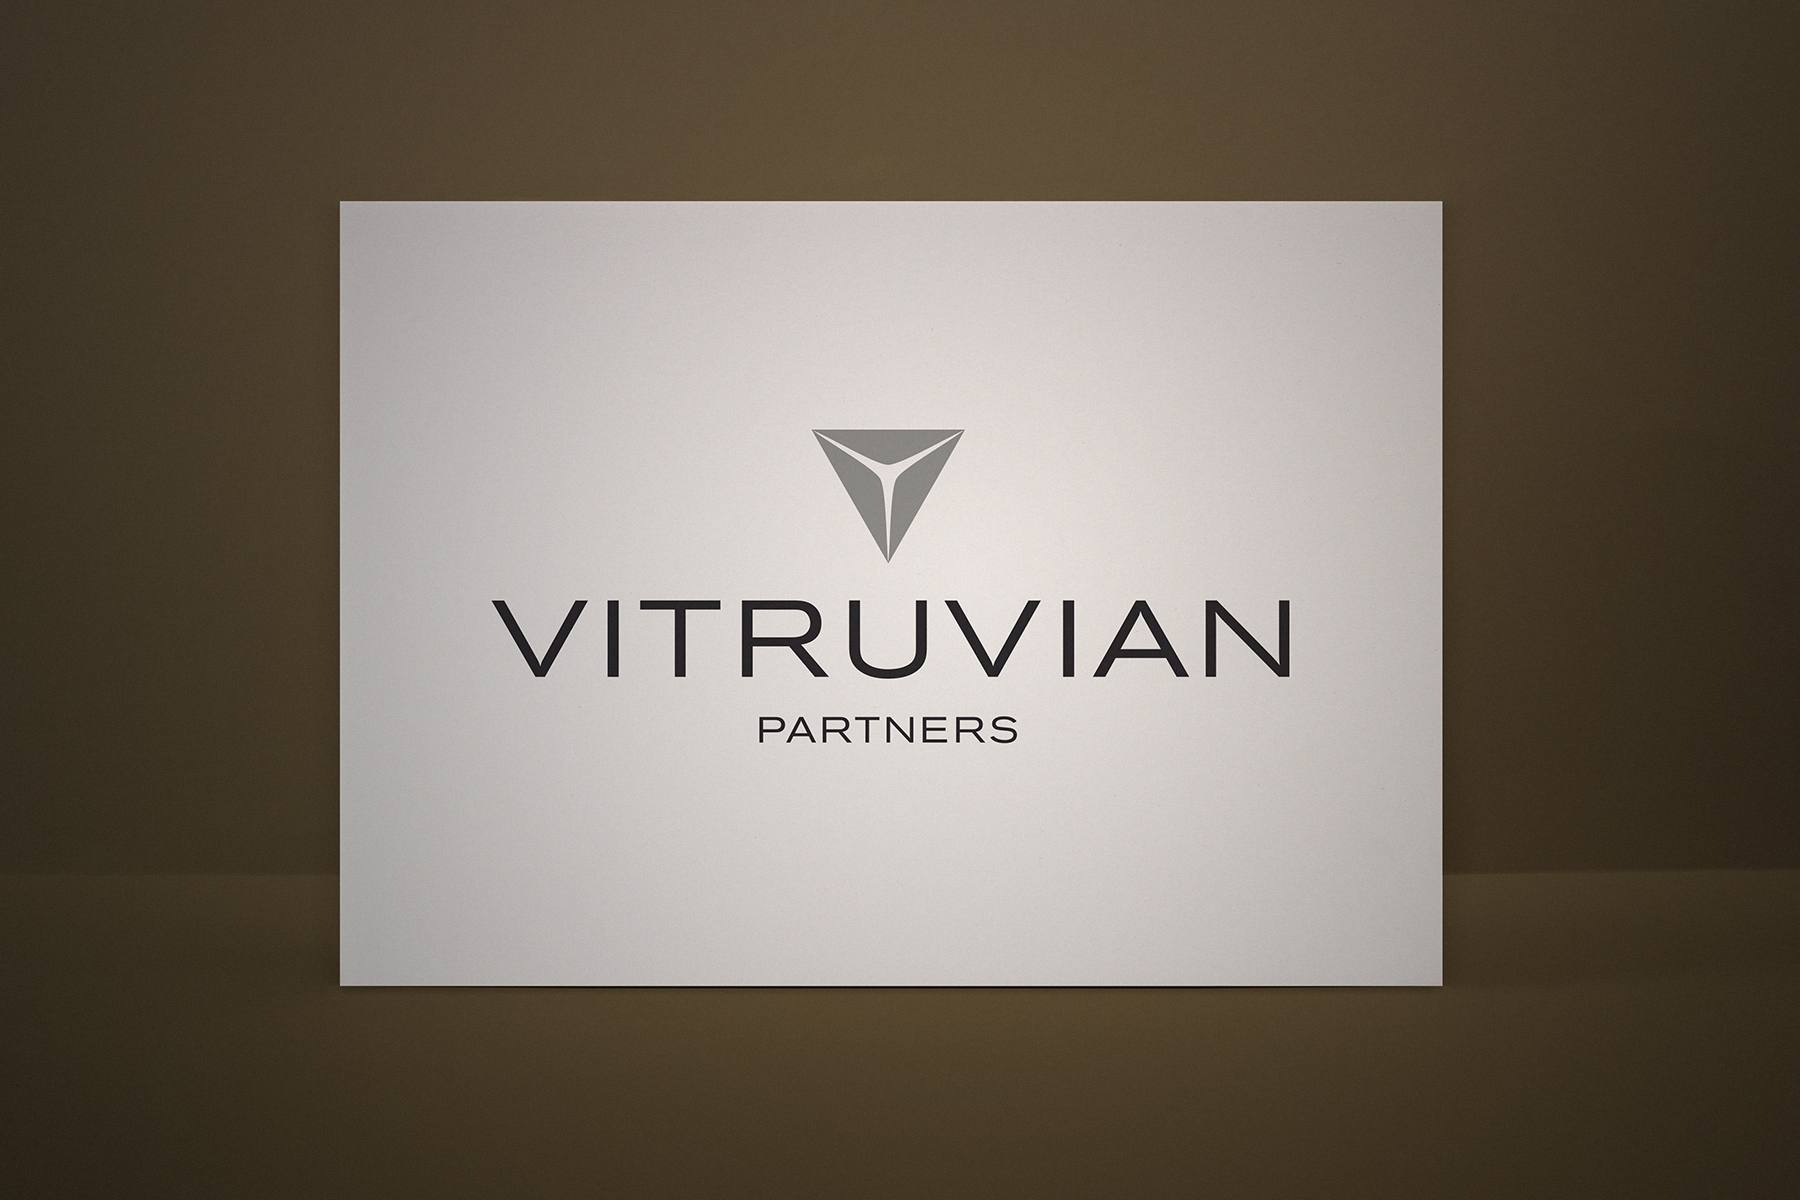 The final Vitruvian logo and icon conveys a formal yet intriguing brand spirit.